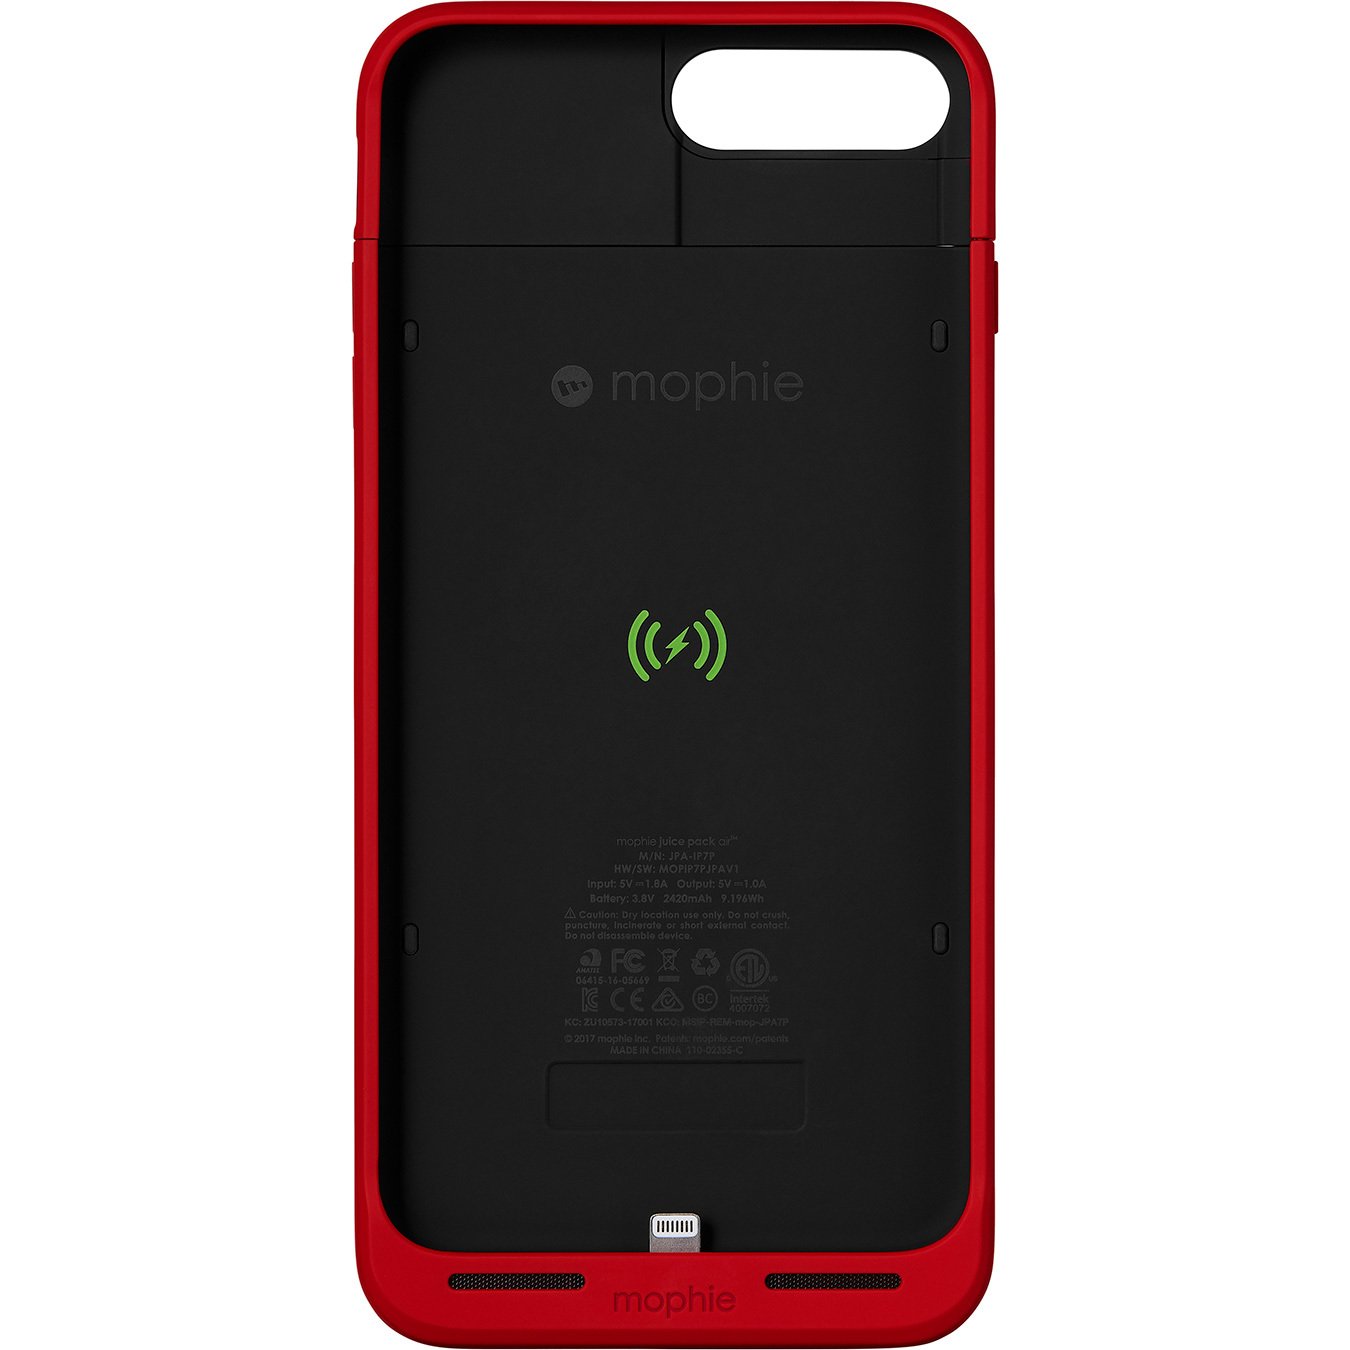 mophie iPhone 8 Plus Juice Pack Air - fall winter 2018 - Supreme